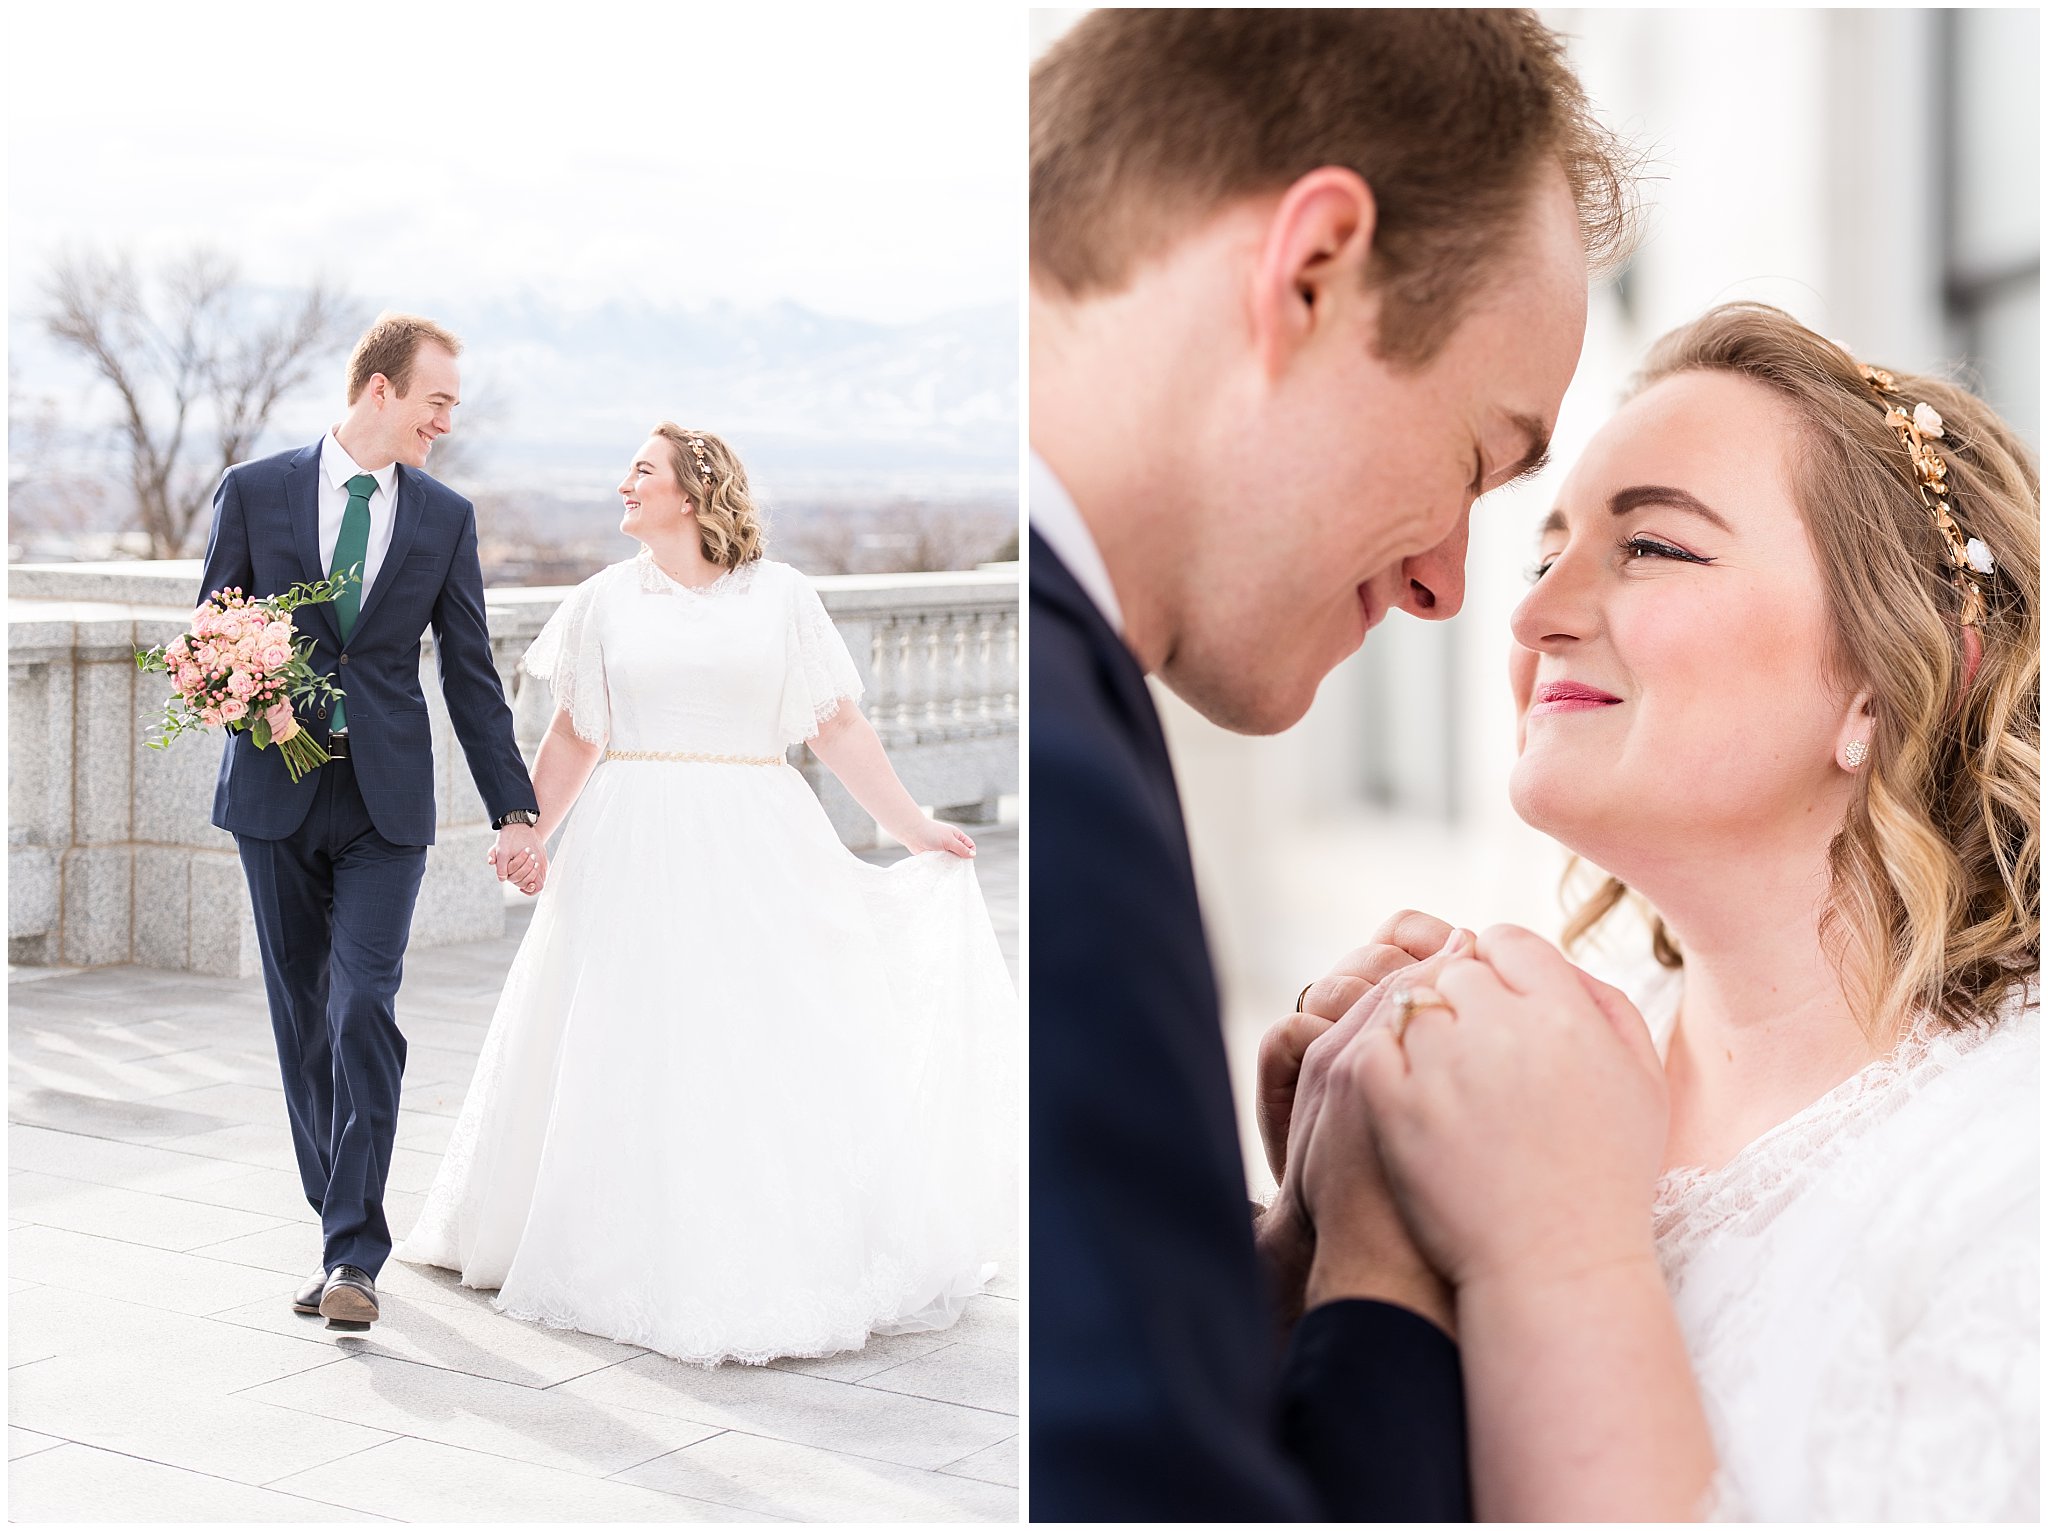 Bride and groom walk and bride looks romantically at groom | Winter Formals at the Utah State Capitol | Utah Wedding Photography